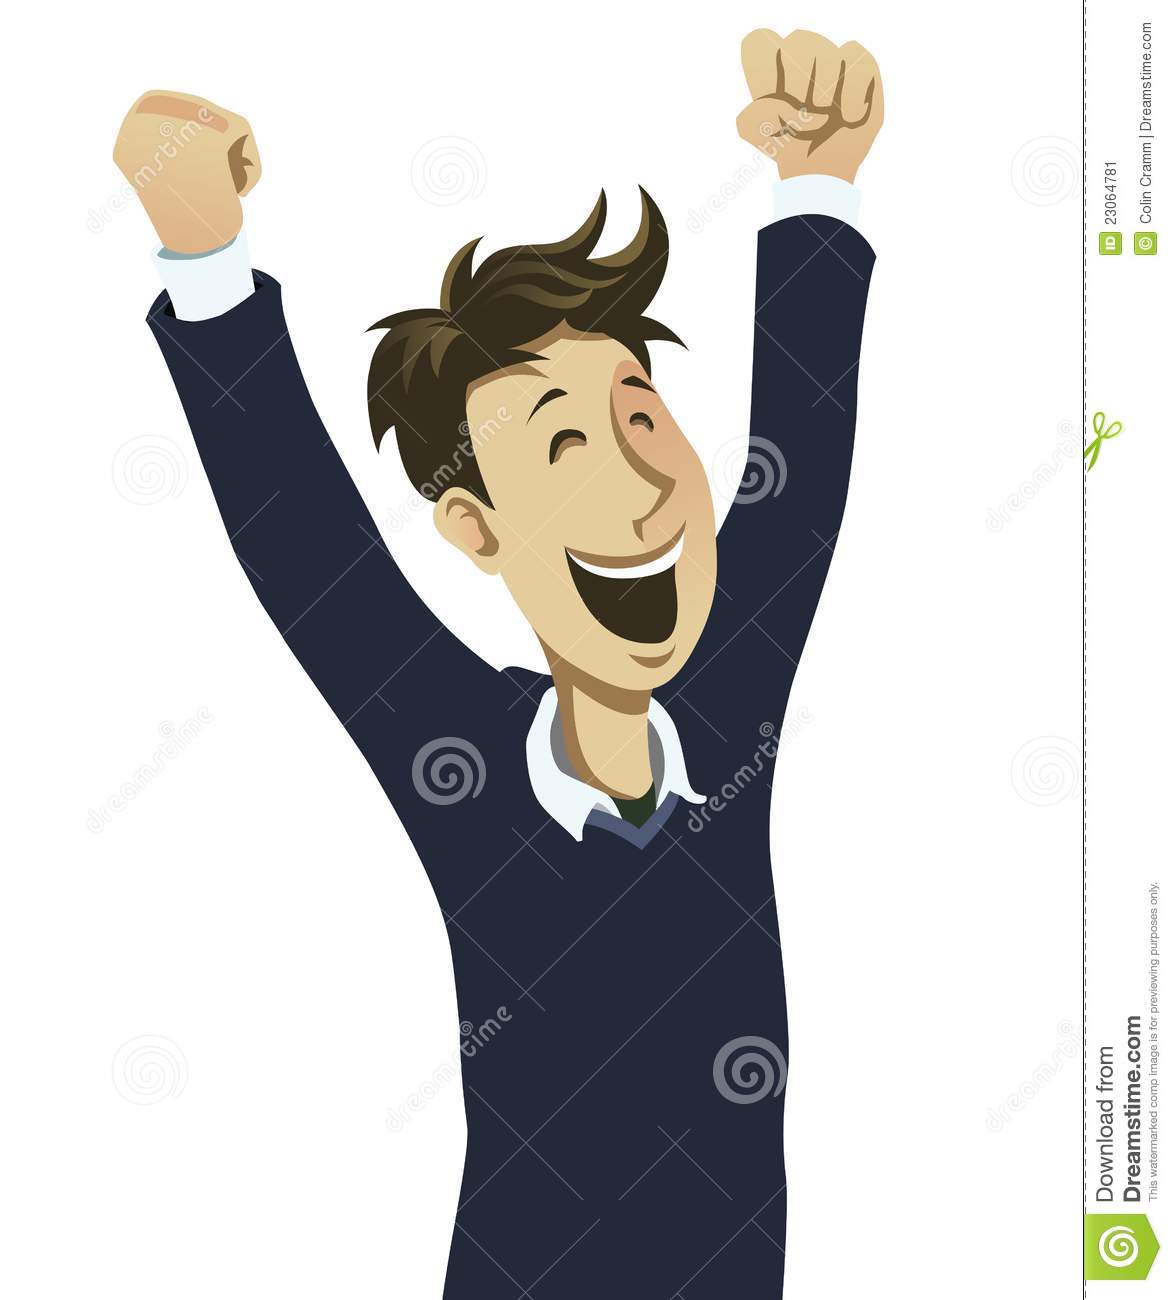 More Similar Stock Images Of   Happy Guy Cheering